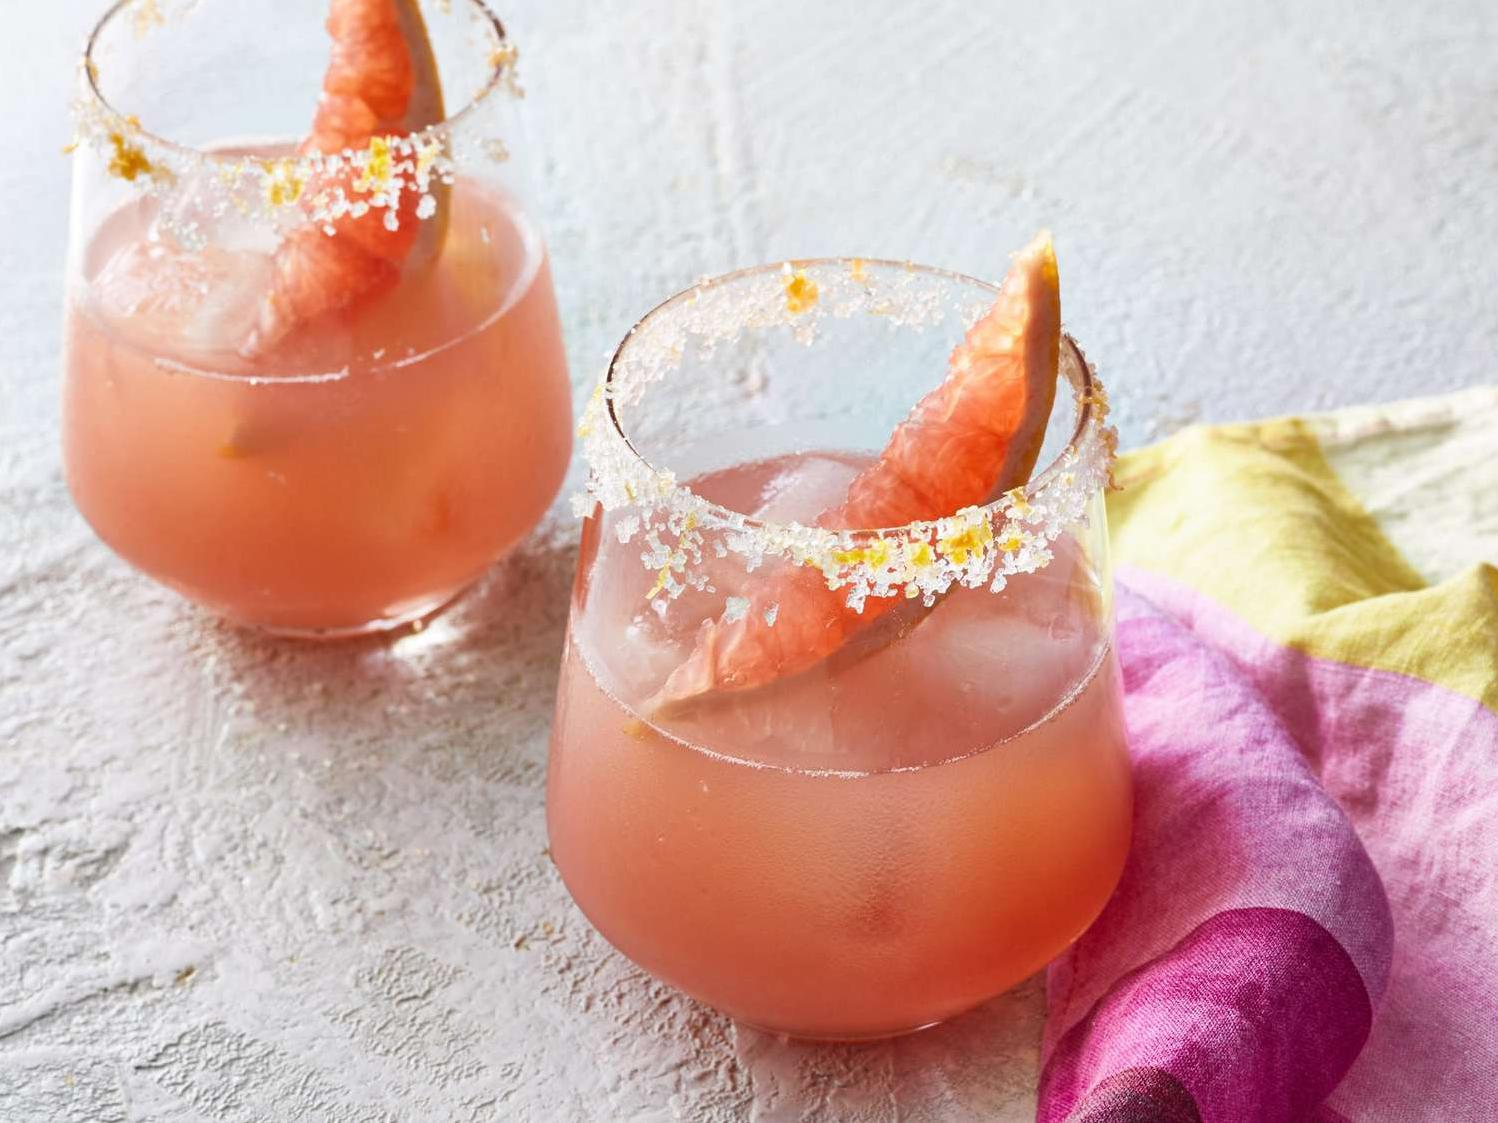  Bring a little southern hospitality to your next cocktail party with this delicious drink.